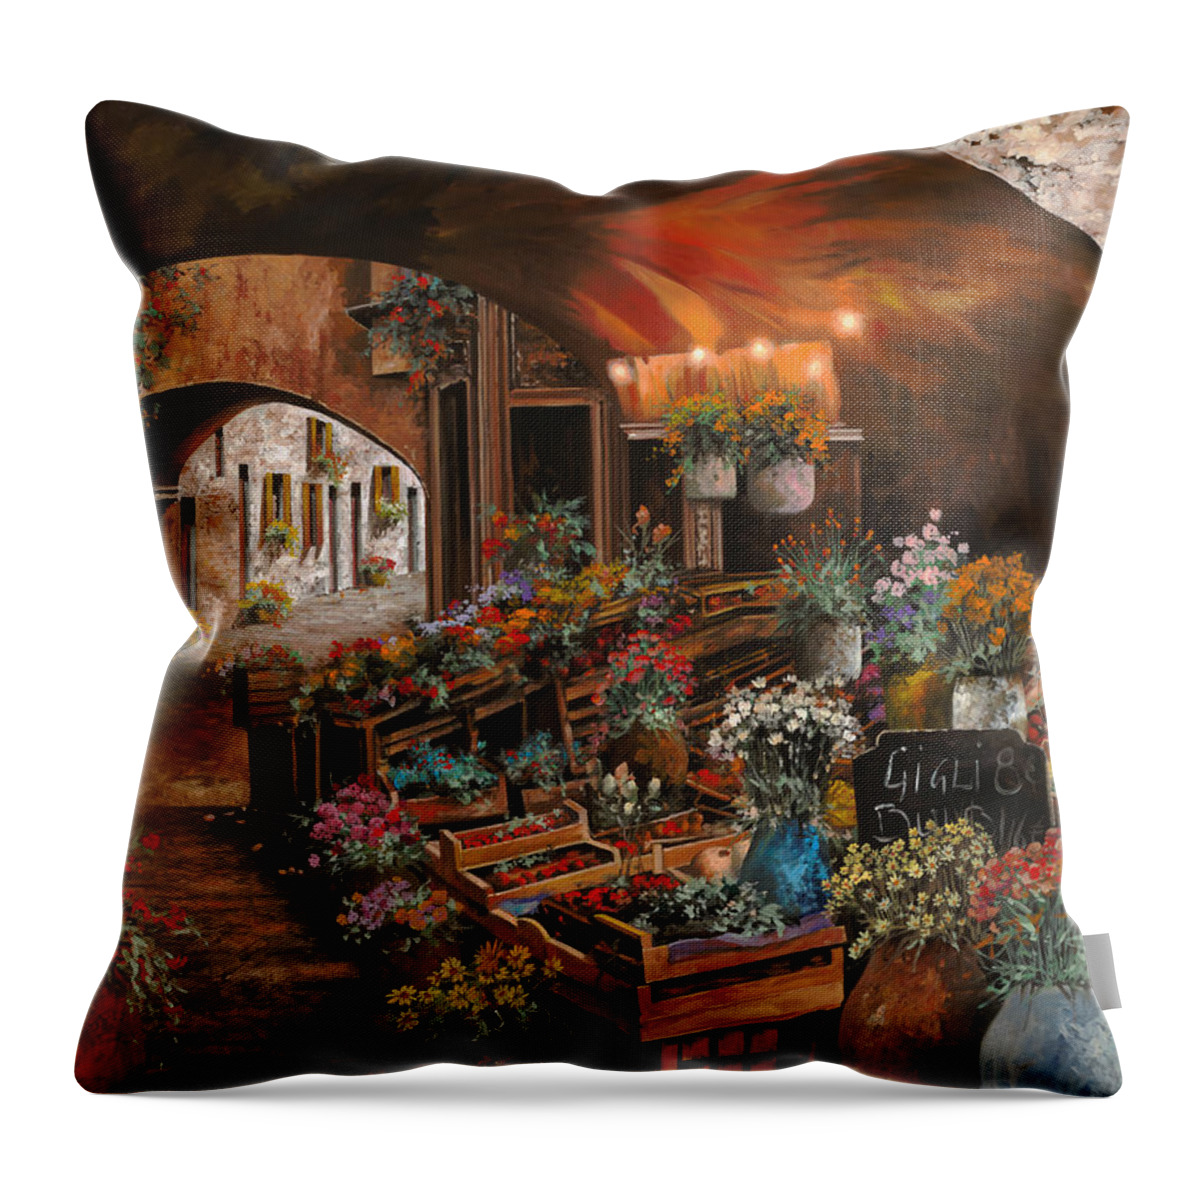 Flower Market Throw Pillow featuring the painting Il Mercato Dei Fiori by Guido Borelli